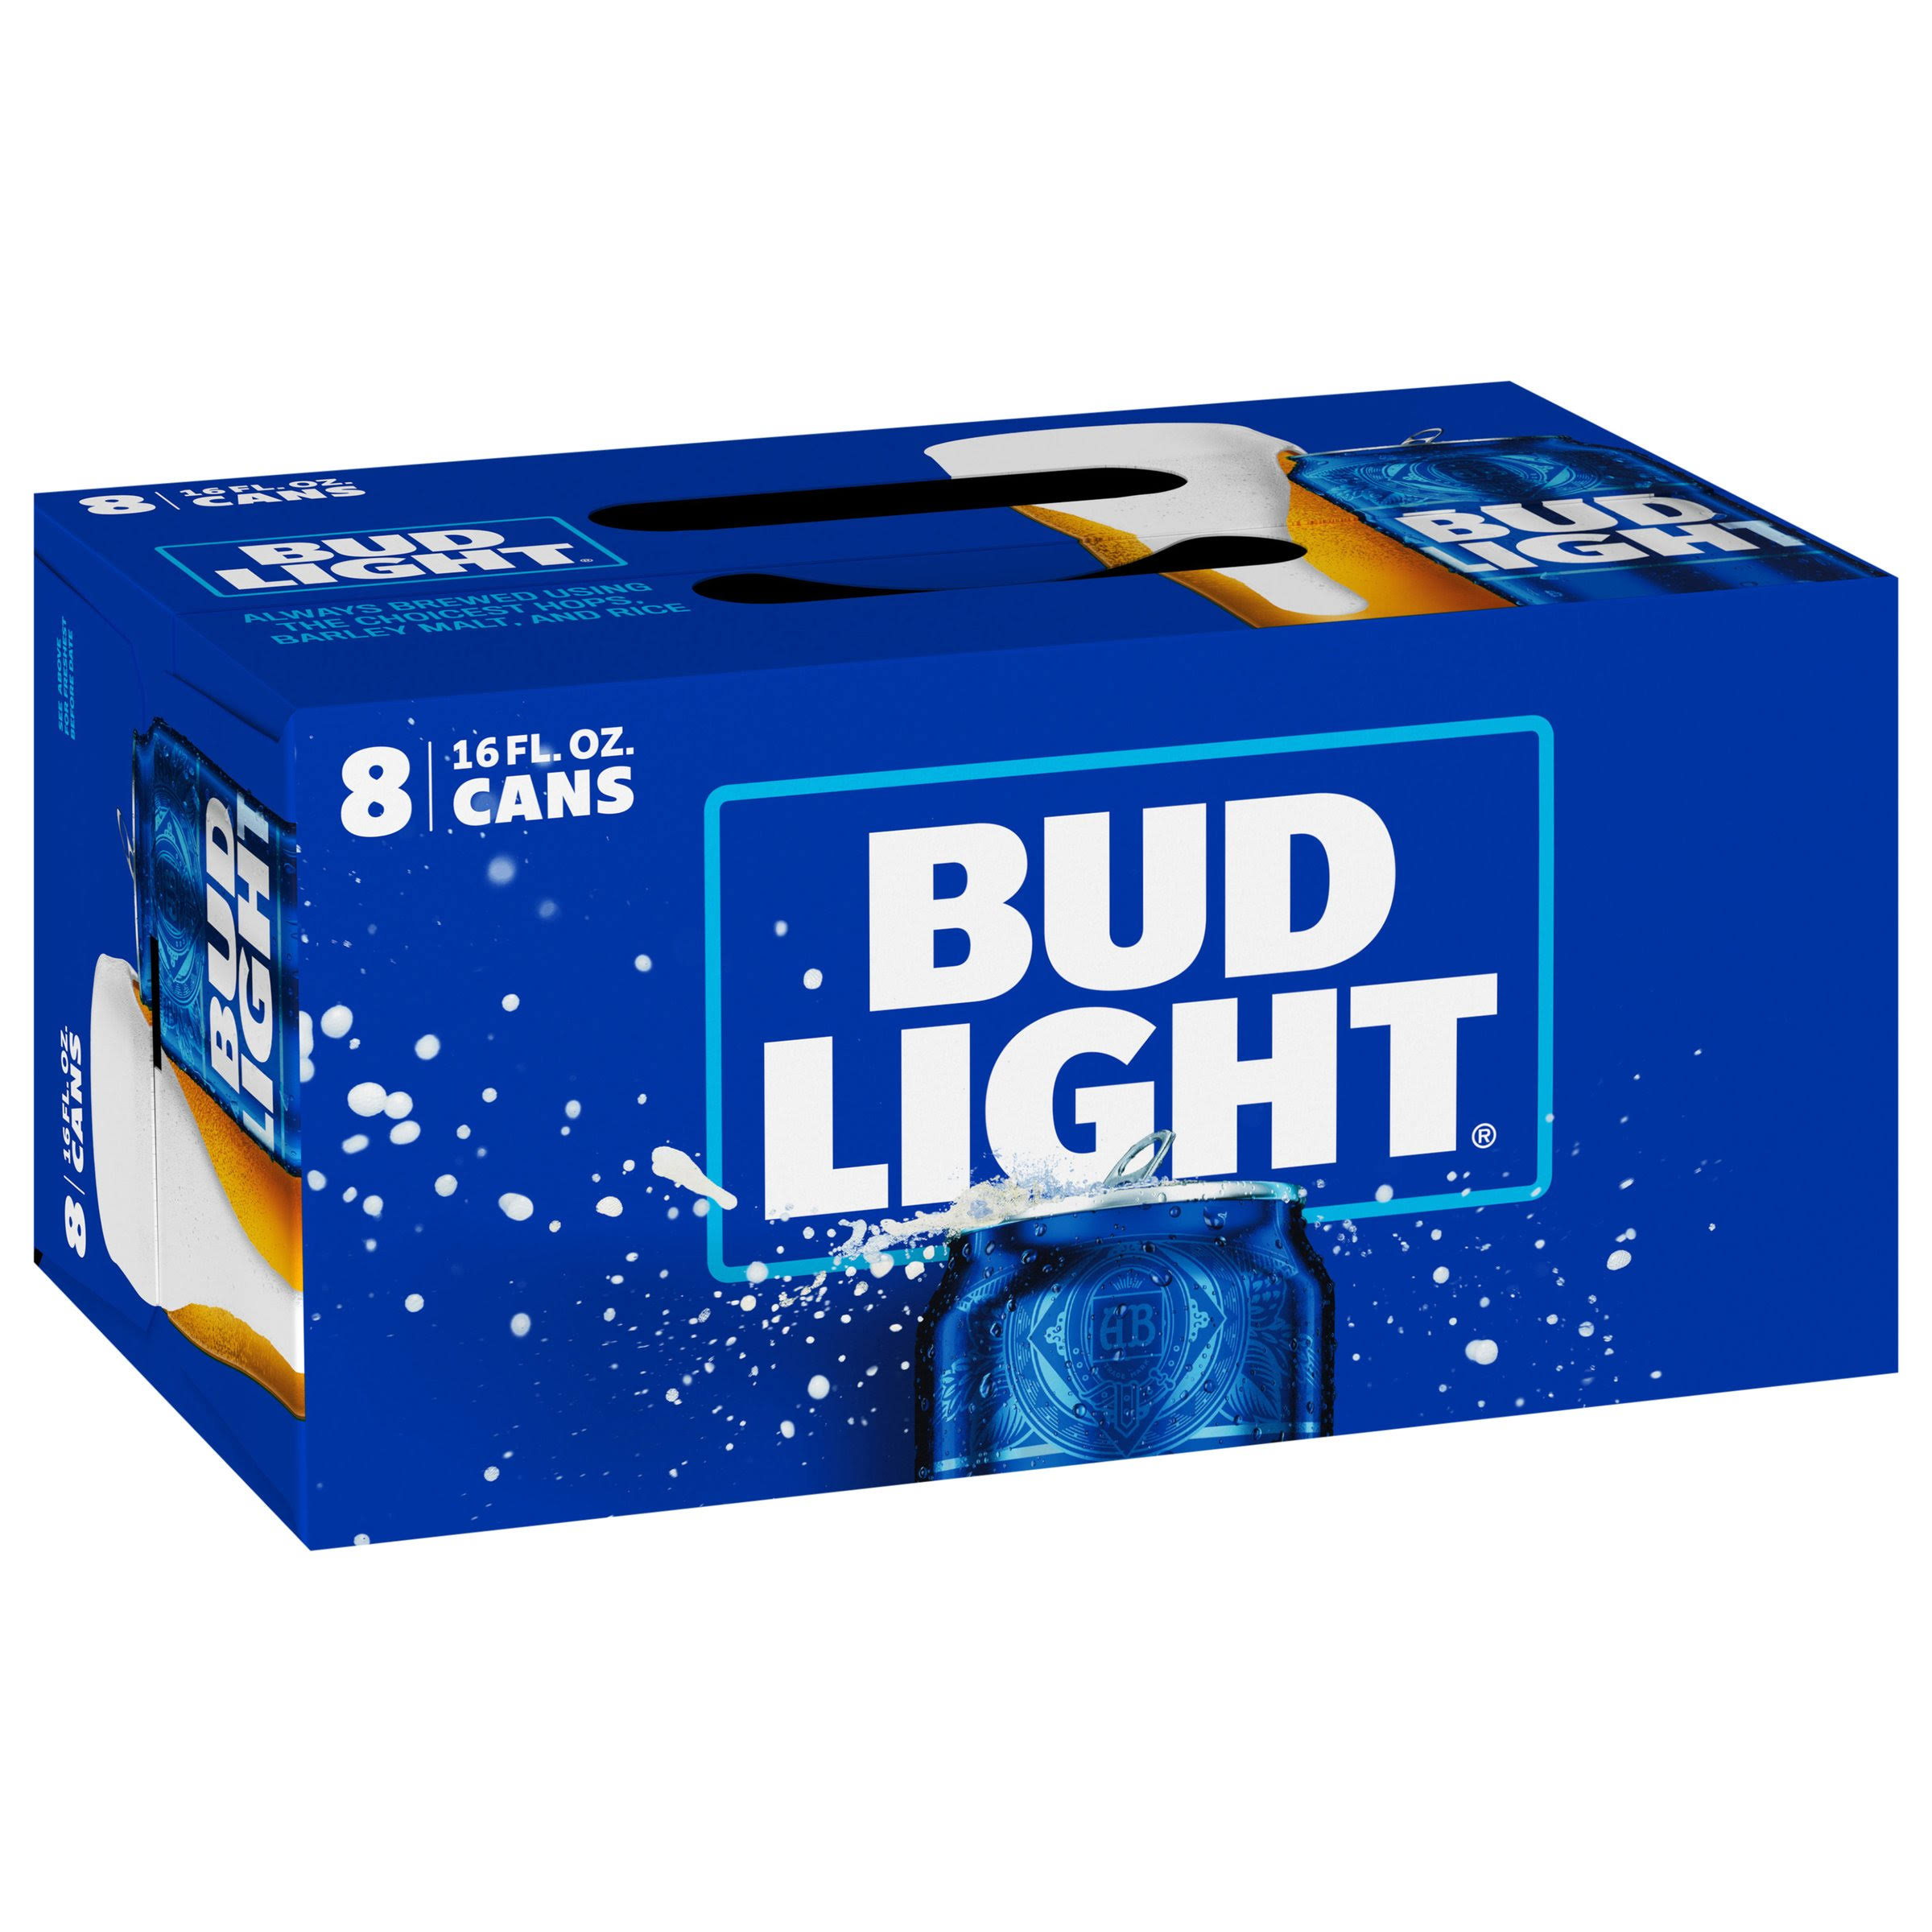 Bud Light Beer - 8 Cans